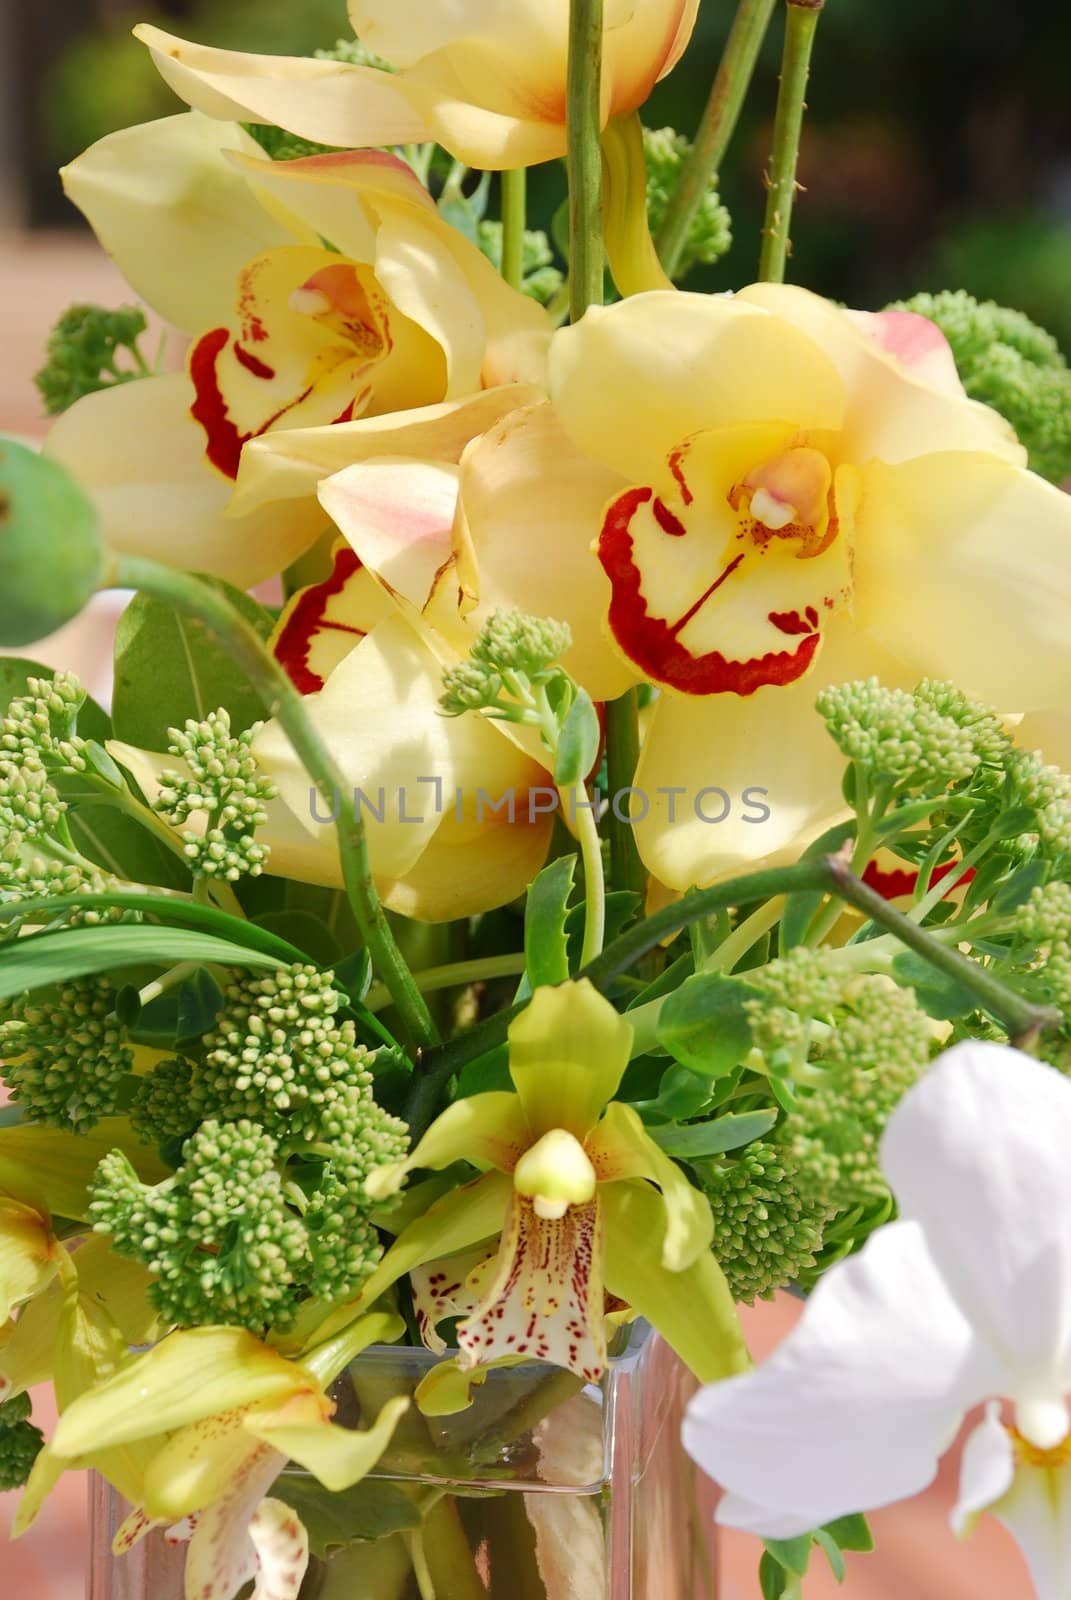 Orchids as Centerpiece by pixelsnap